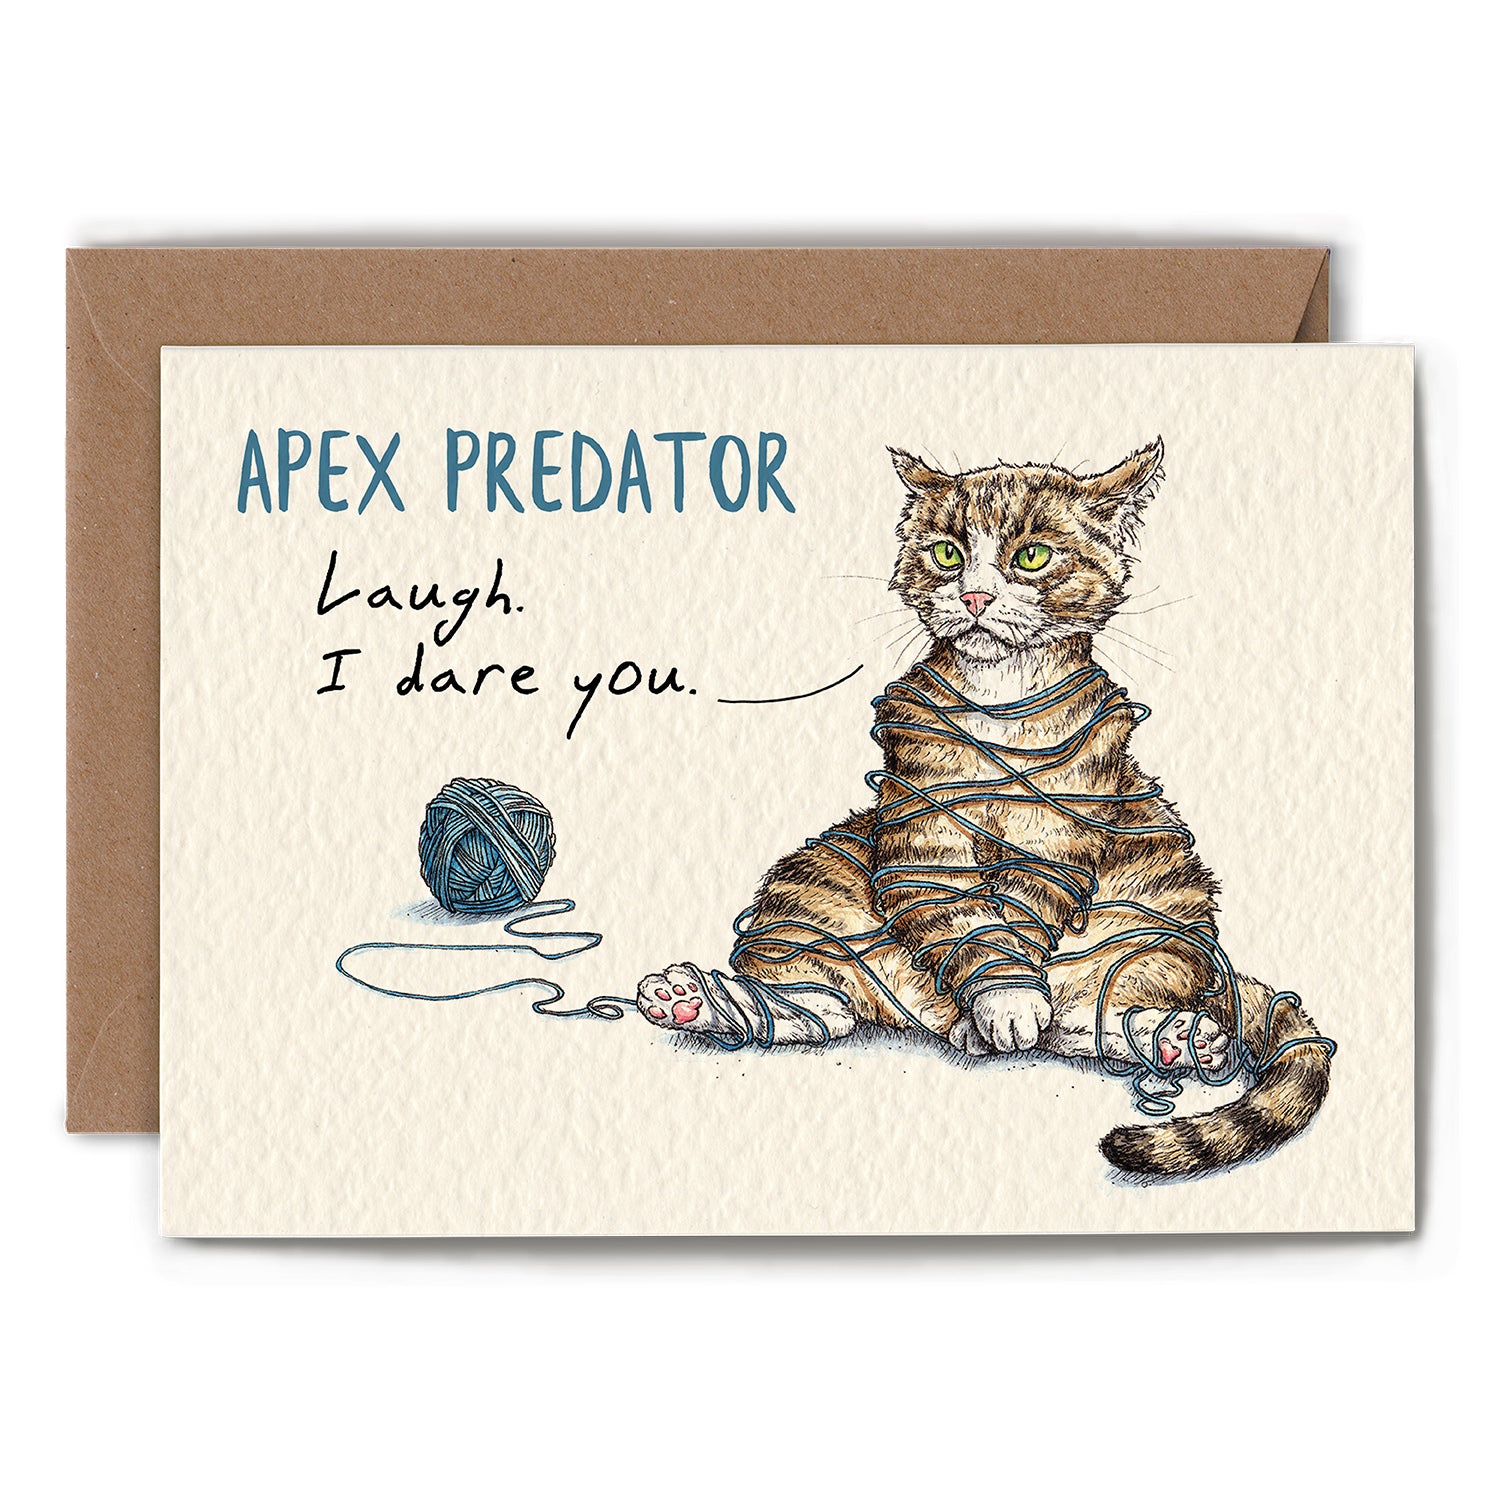 A &quot;Apex Predator (Tangled)&quot; card featuring a house cat tangled in blue yard, saying &quot;Laugh, I dare you.&quot;